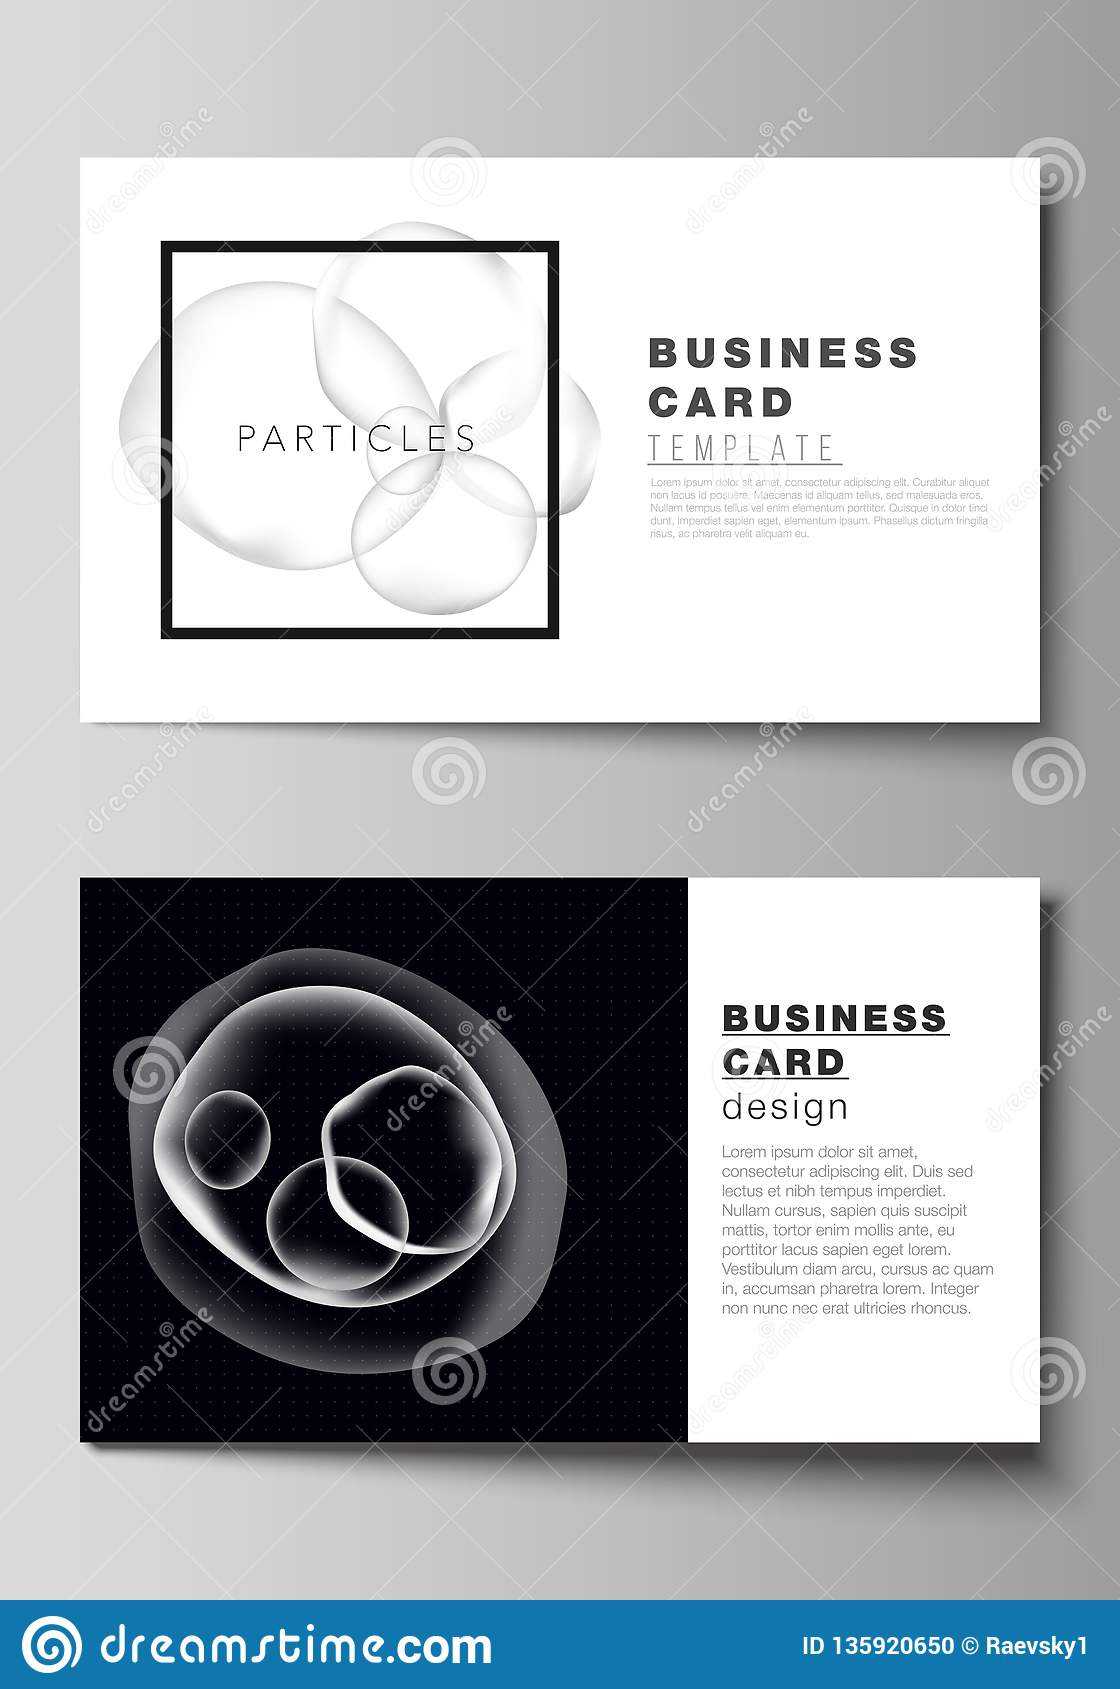 The Minimalistic Editable Vector Layout Of Two Creative For Medical Business Cards Templates Free